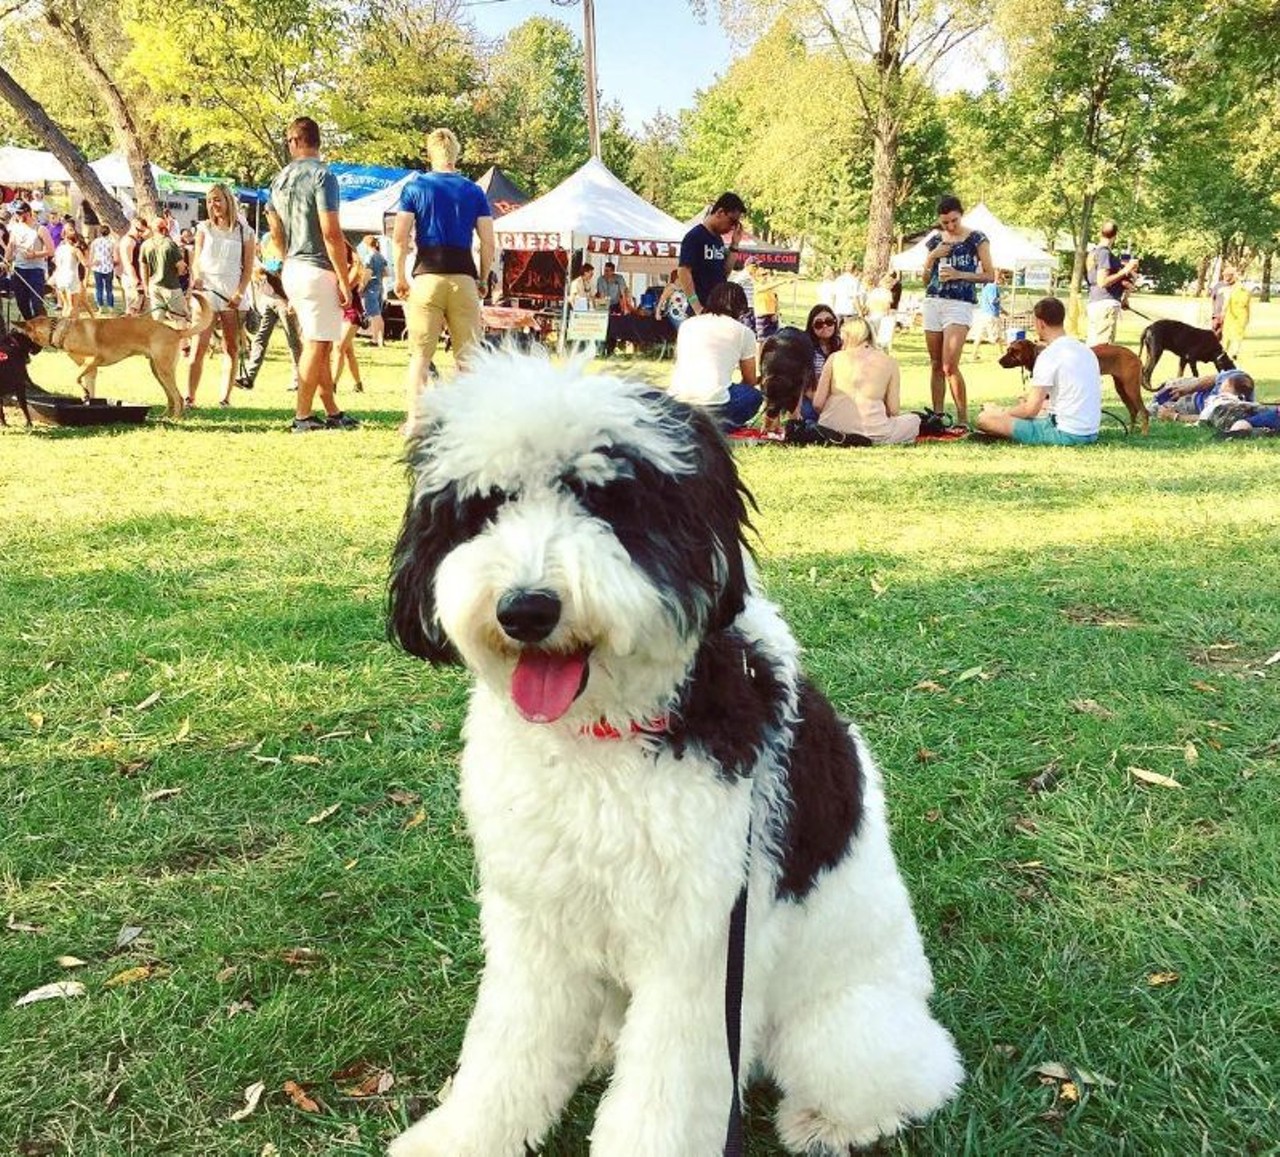 Saturday, Oct. 7 
Barktoberfest
Bark in the park! Give our four legged friends a visit - and maybe bring one home - while you get your food truck on. There will be brews. 
12 - 4 pm; Lake Eola Park, 100 N. Eola Drive; menu prices vary; (407) 836-3111 www.orangecountyfl.net/Barktoberfest
Photo via sweetgus9/Instagram